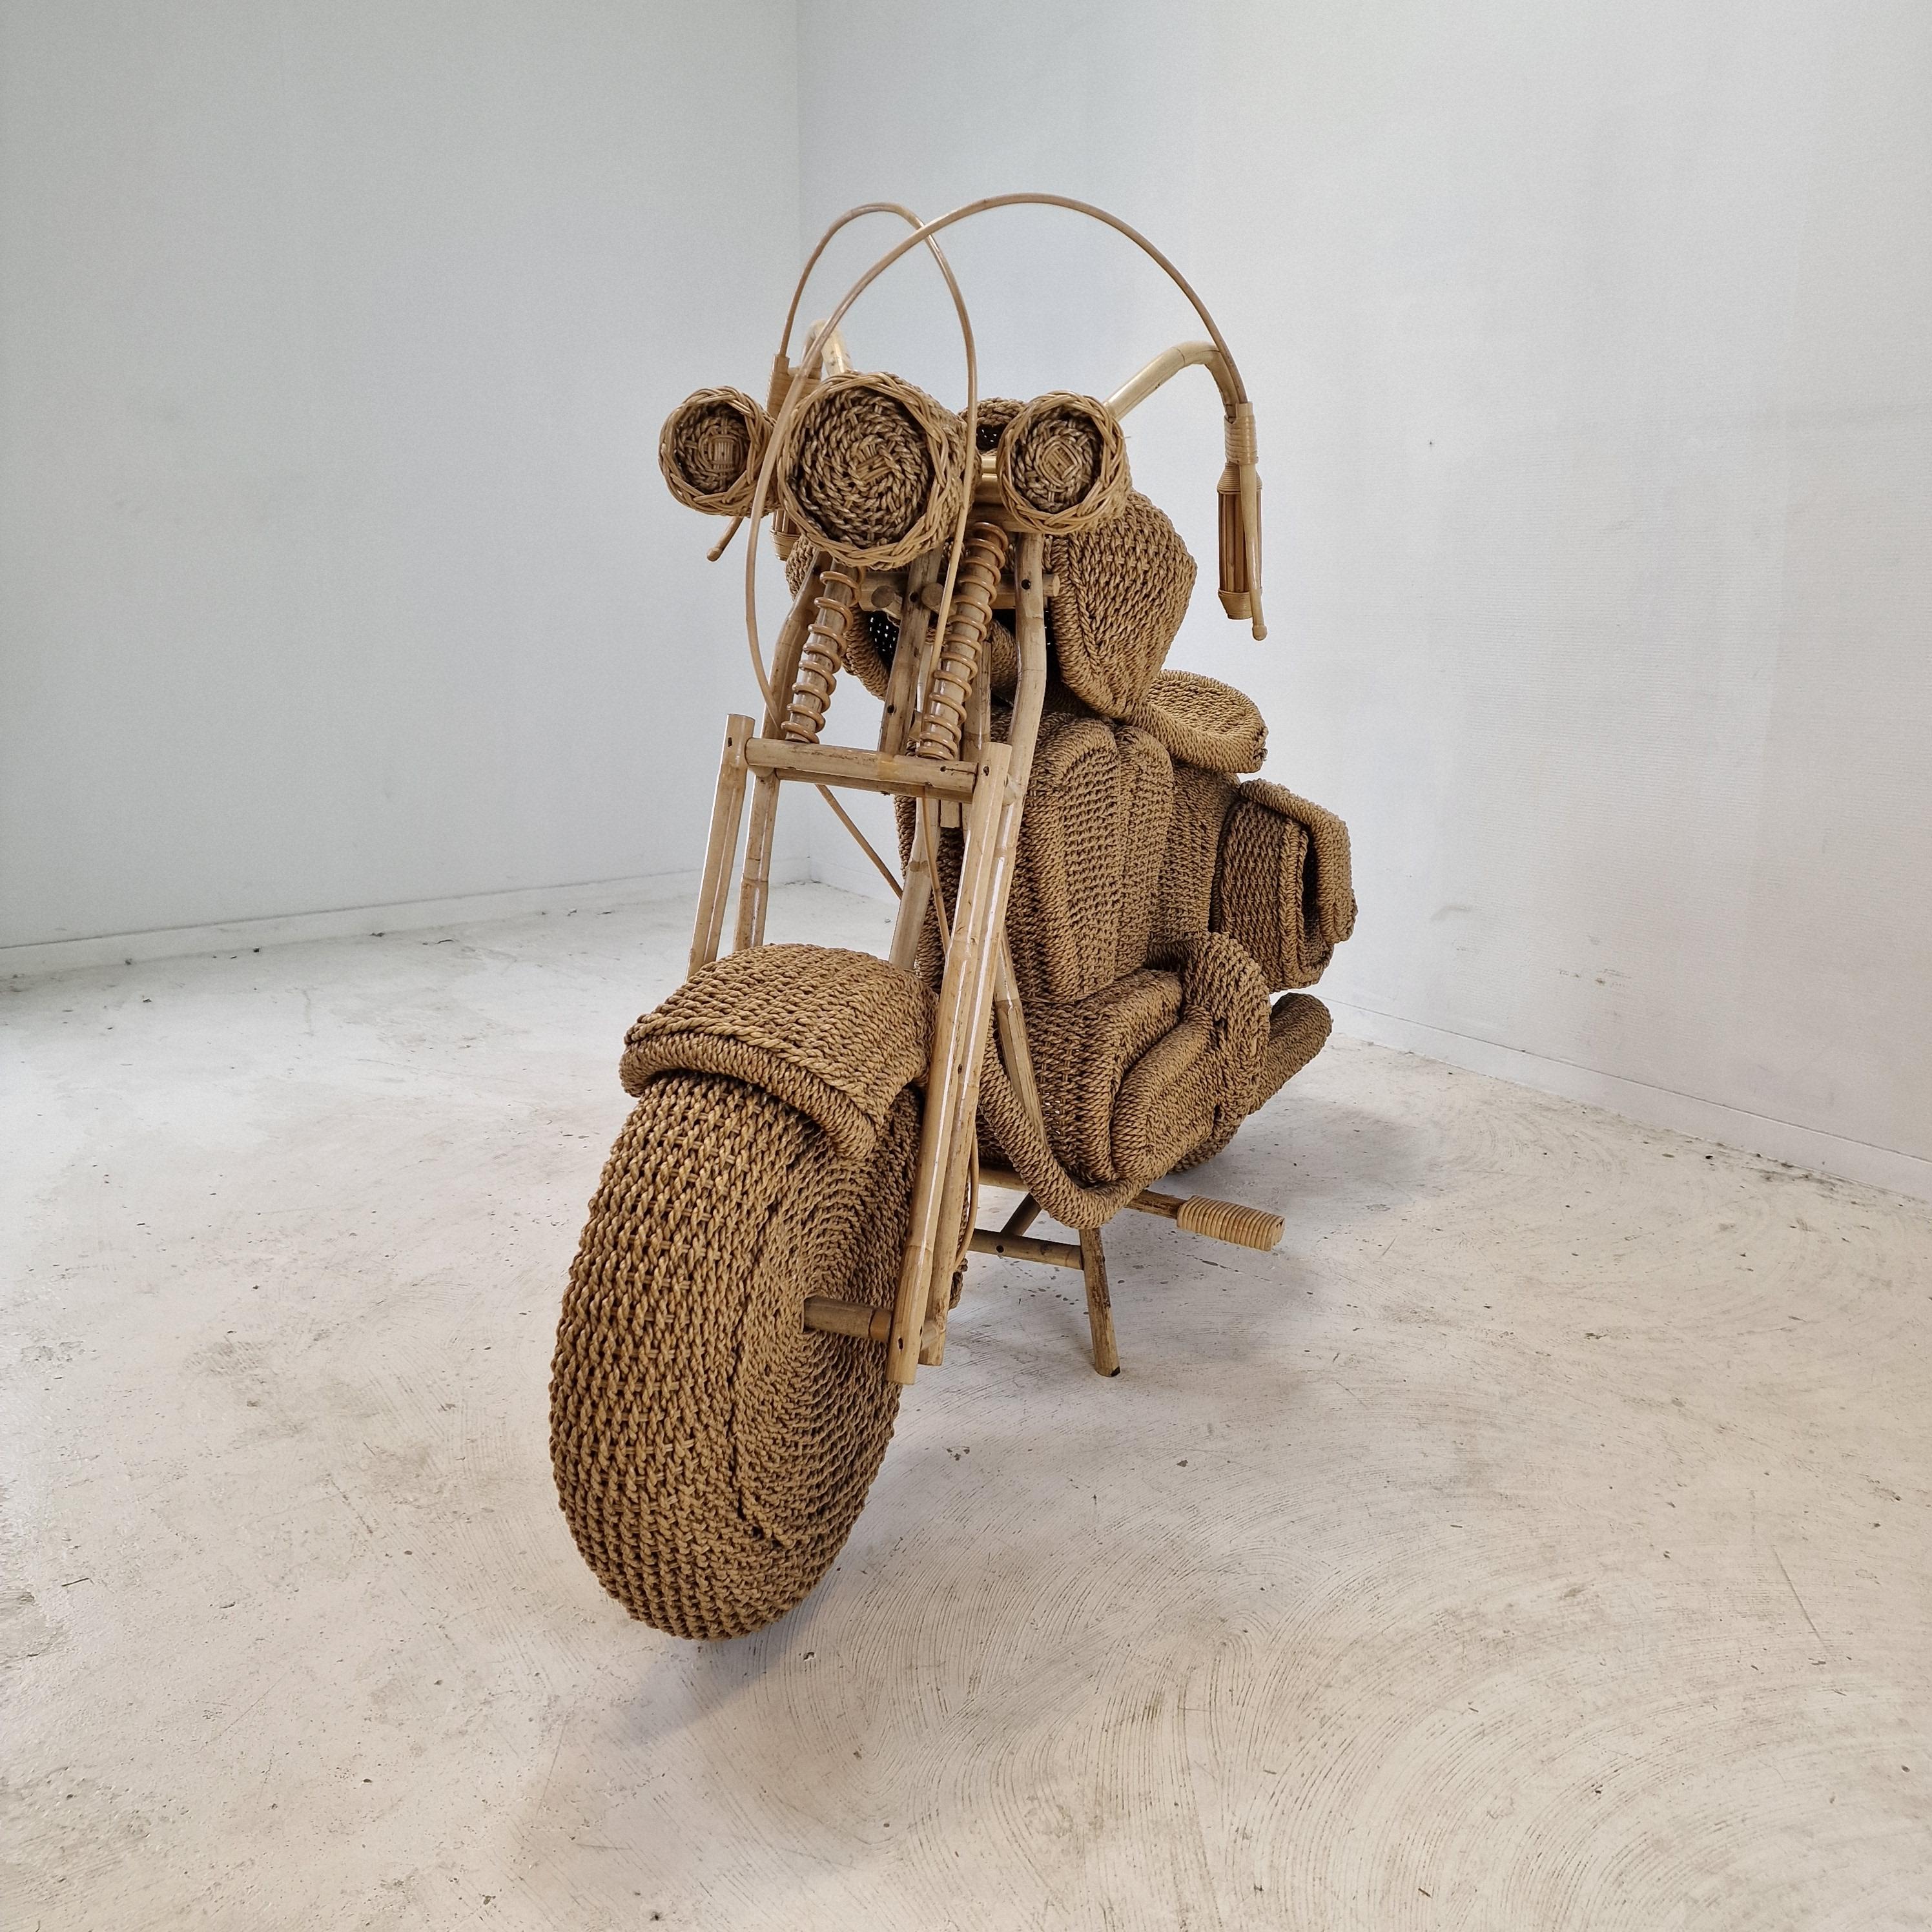 Bamboo Tom Dixon Life Size Harley Davidson Motorcycle, 1980's For Sale